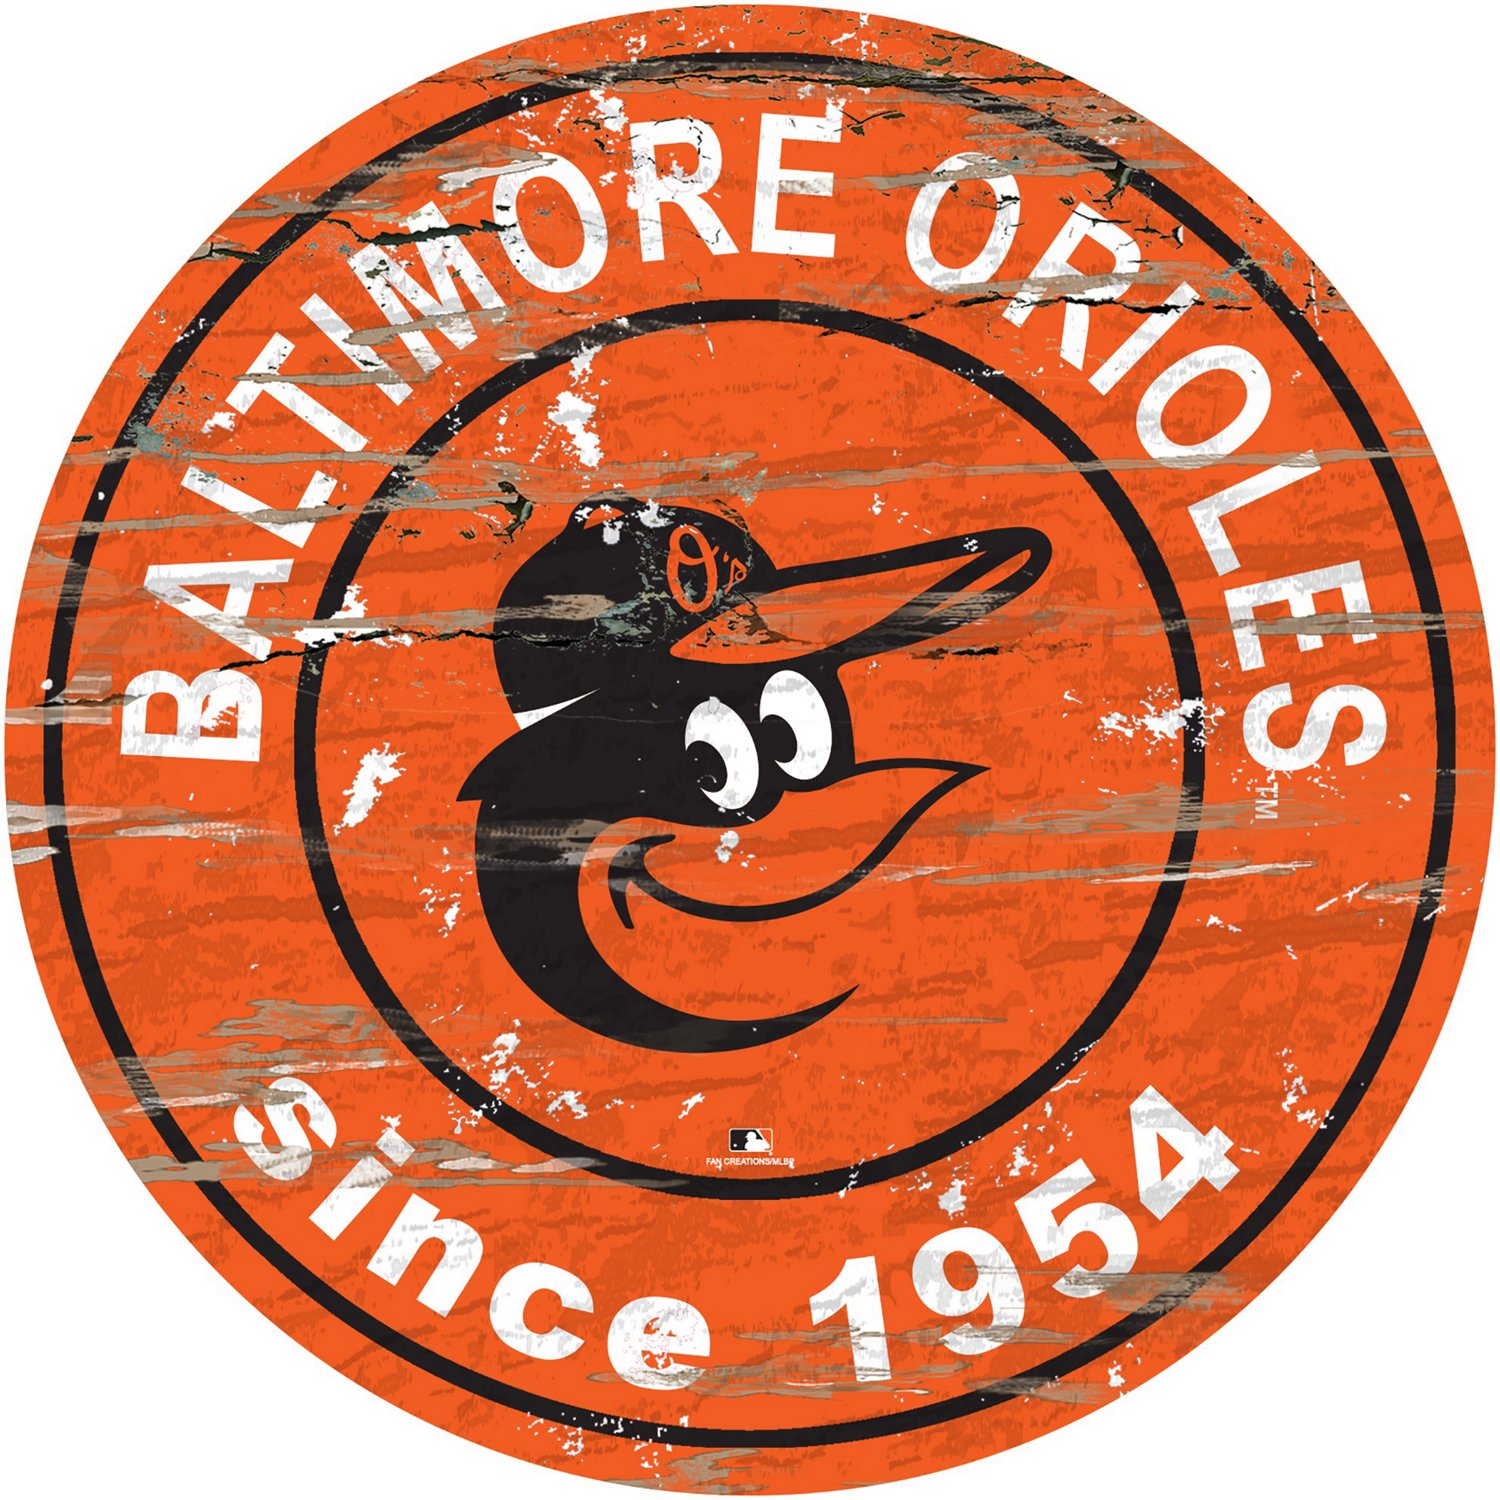 Baltimore Orioles: Fans can help with winter gear drop off